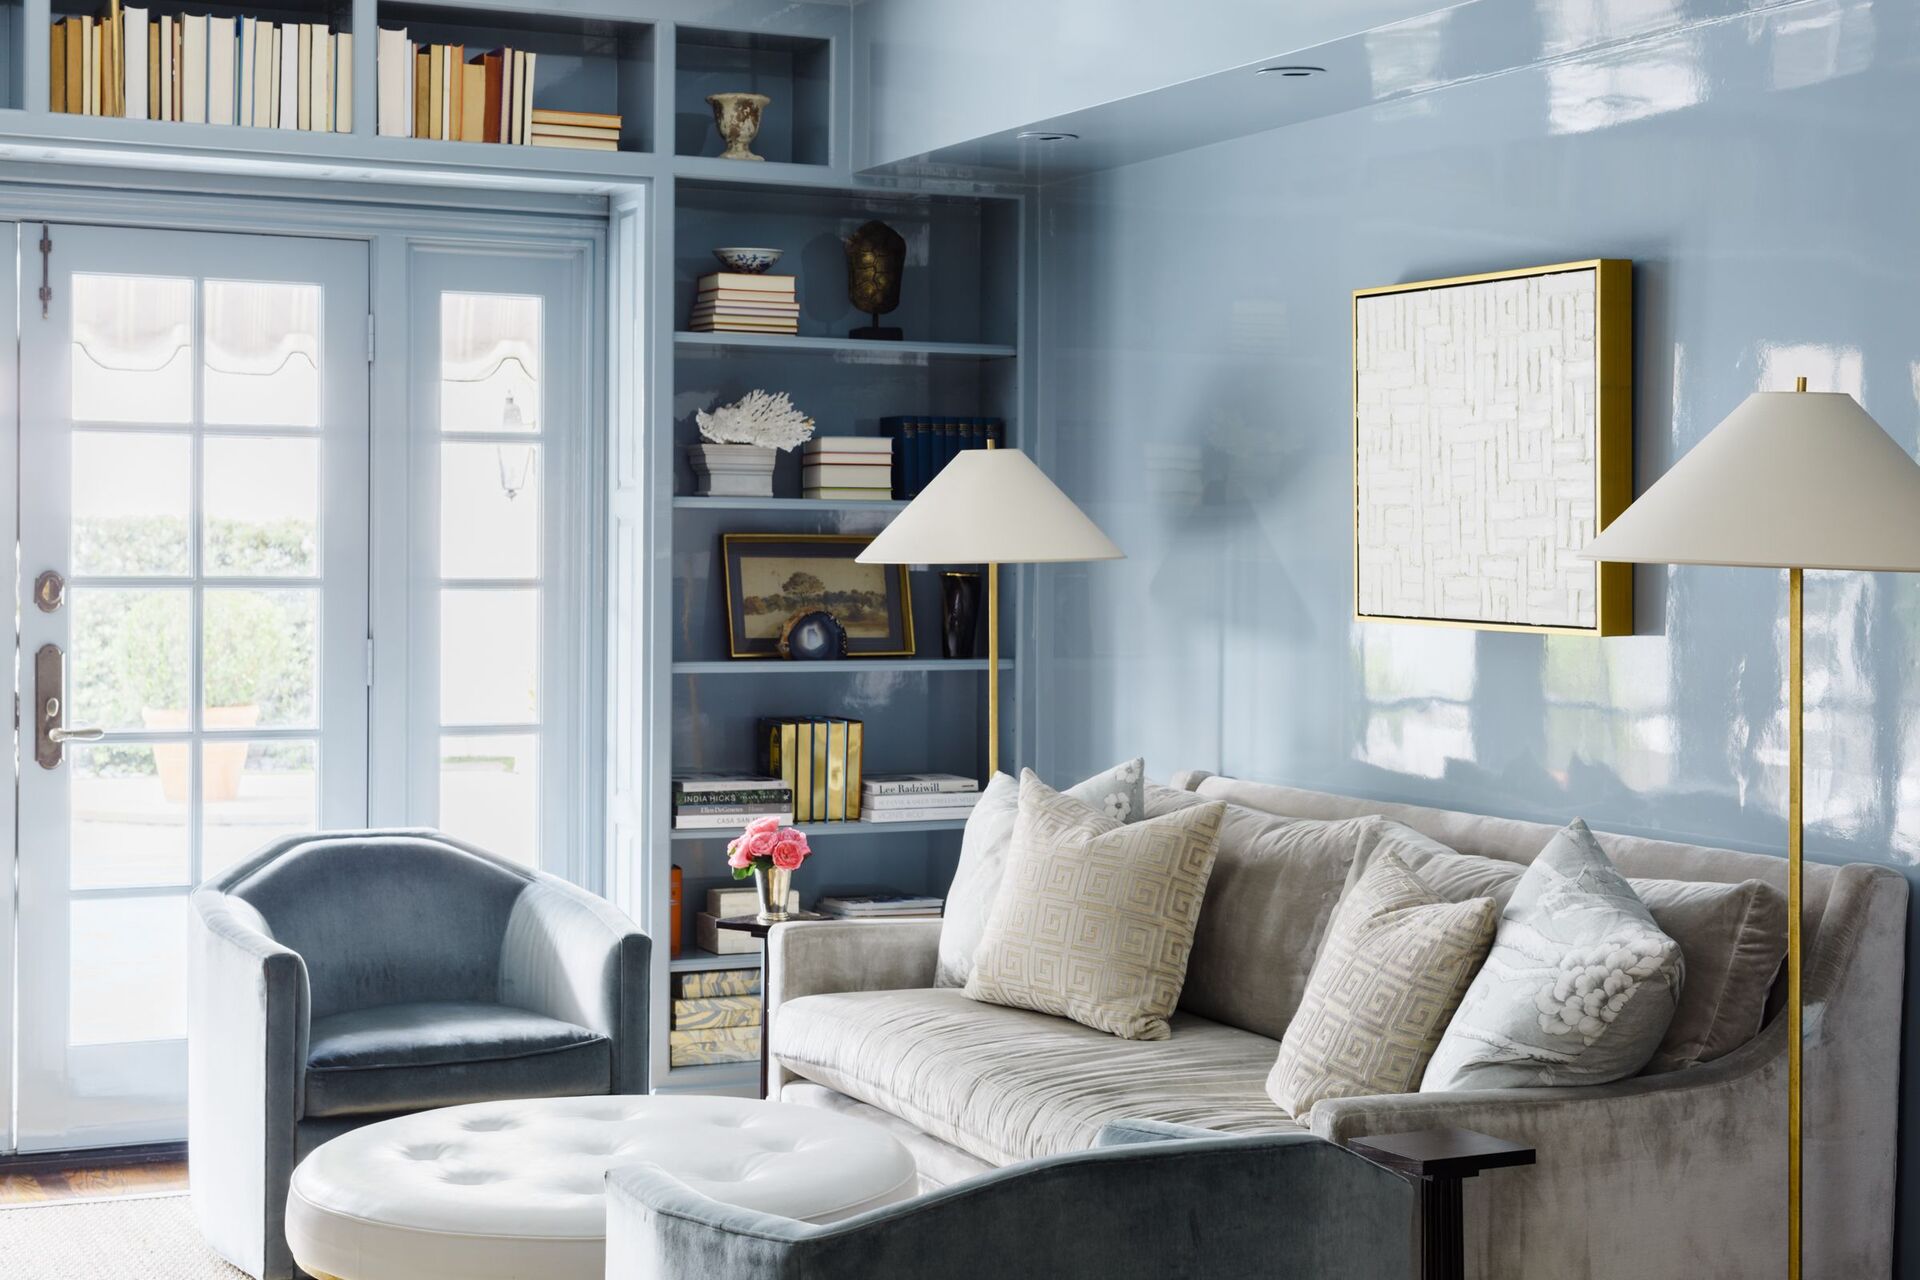 Quick And Easy Paint Projects: 10 Speedy And Stylish Ideas